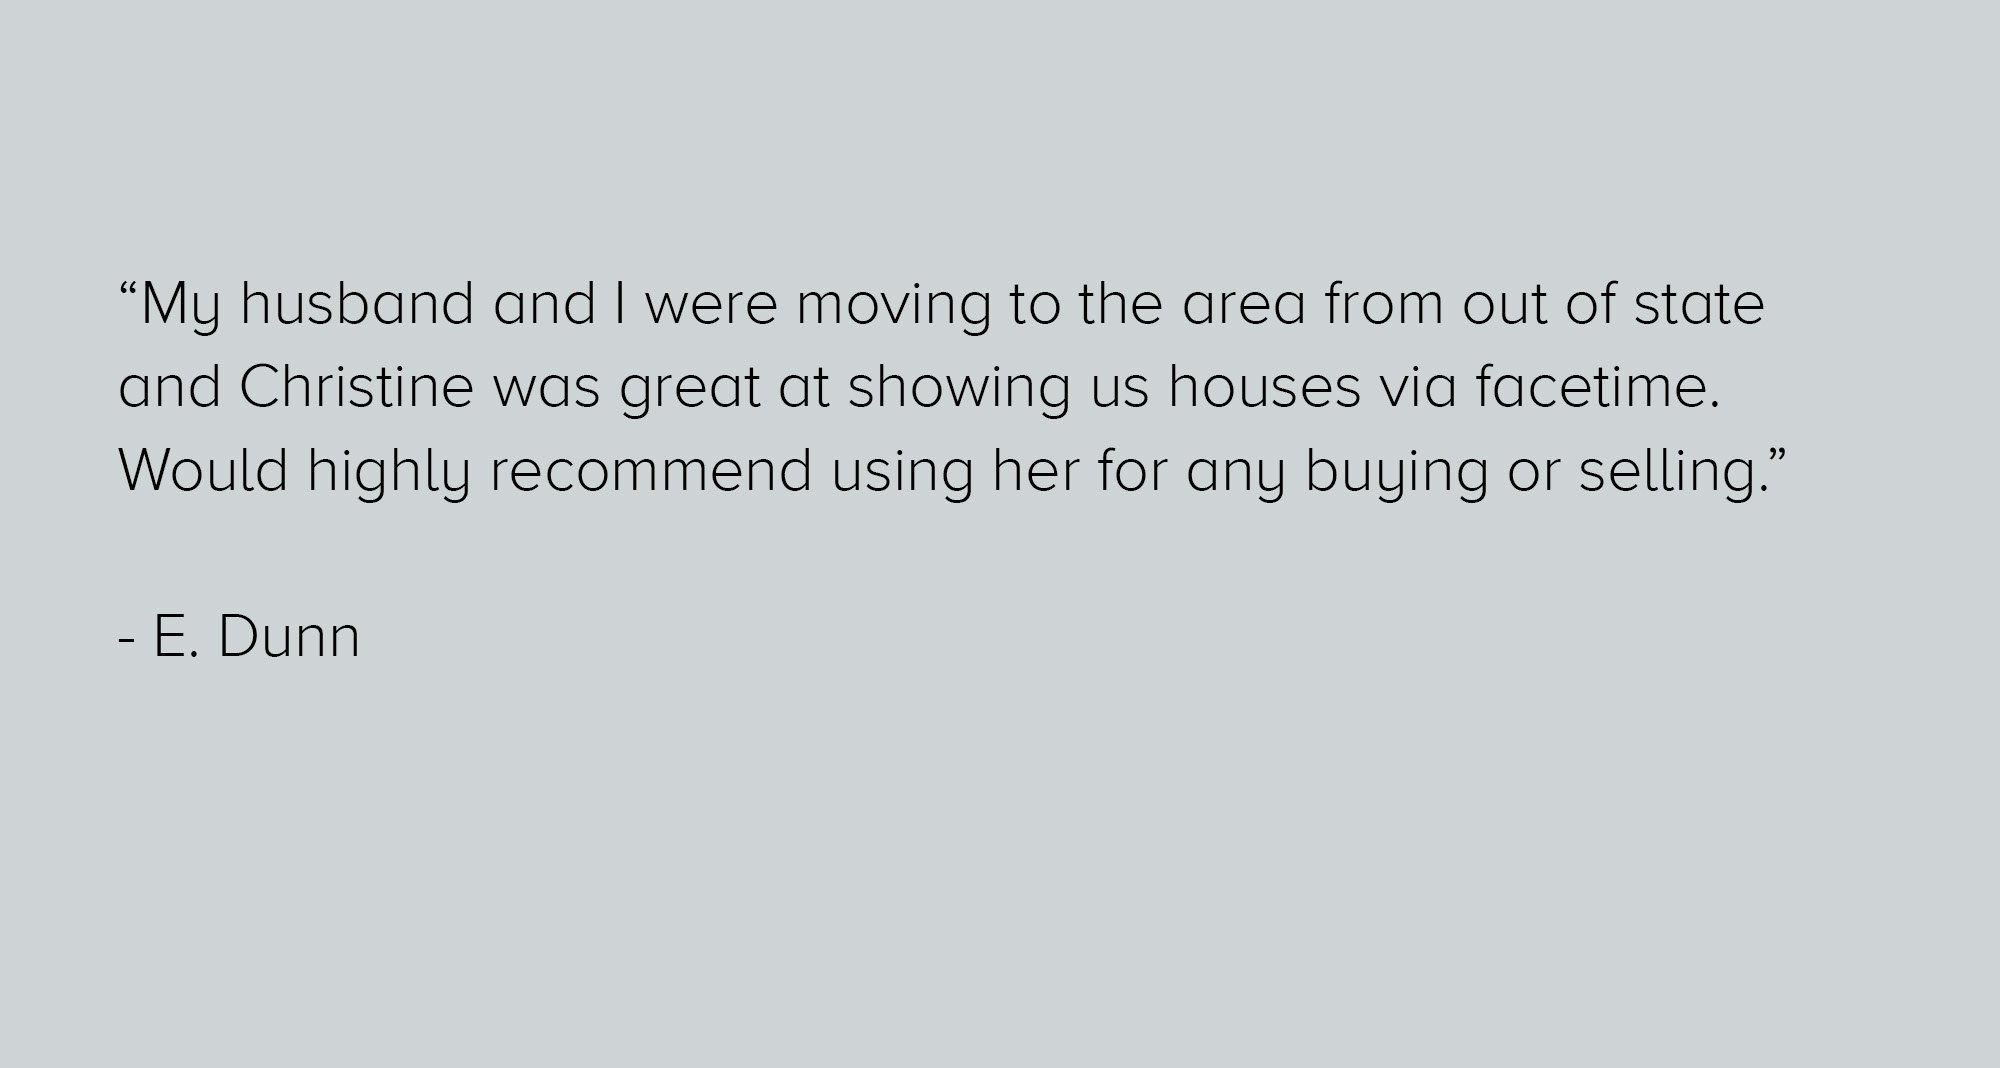 relocation-agent-review.jpg